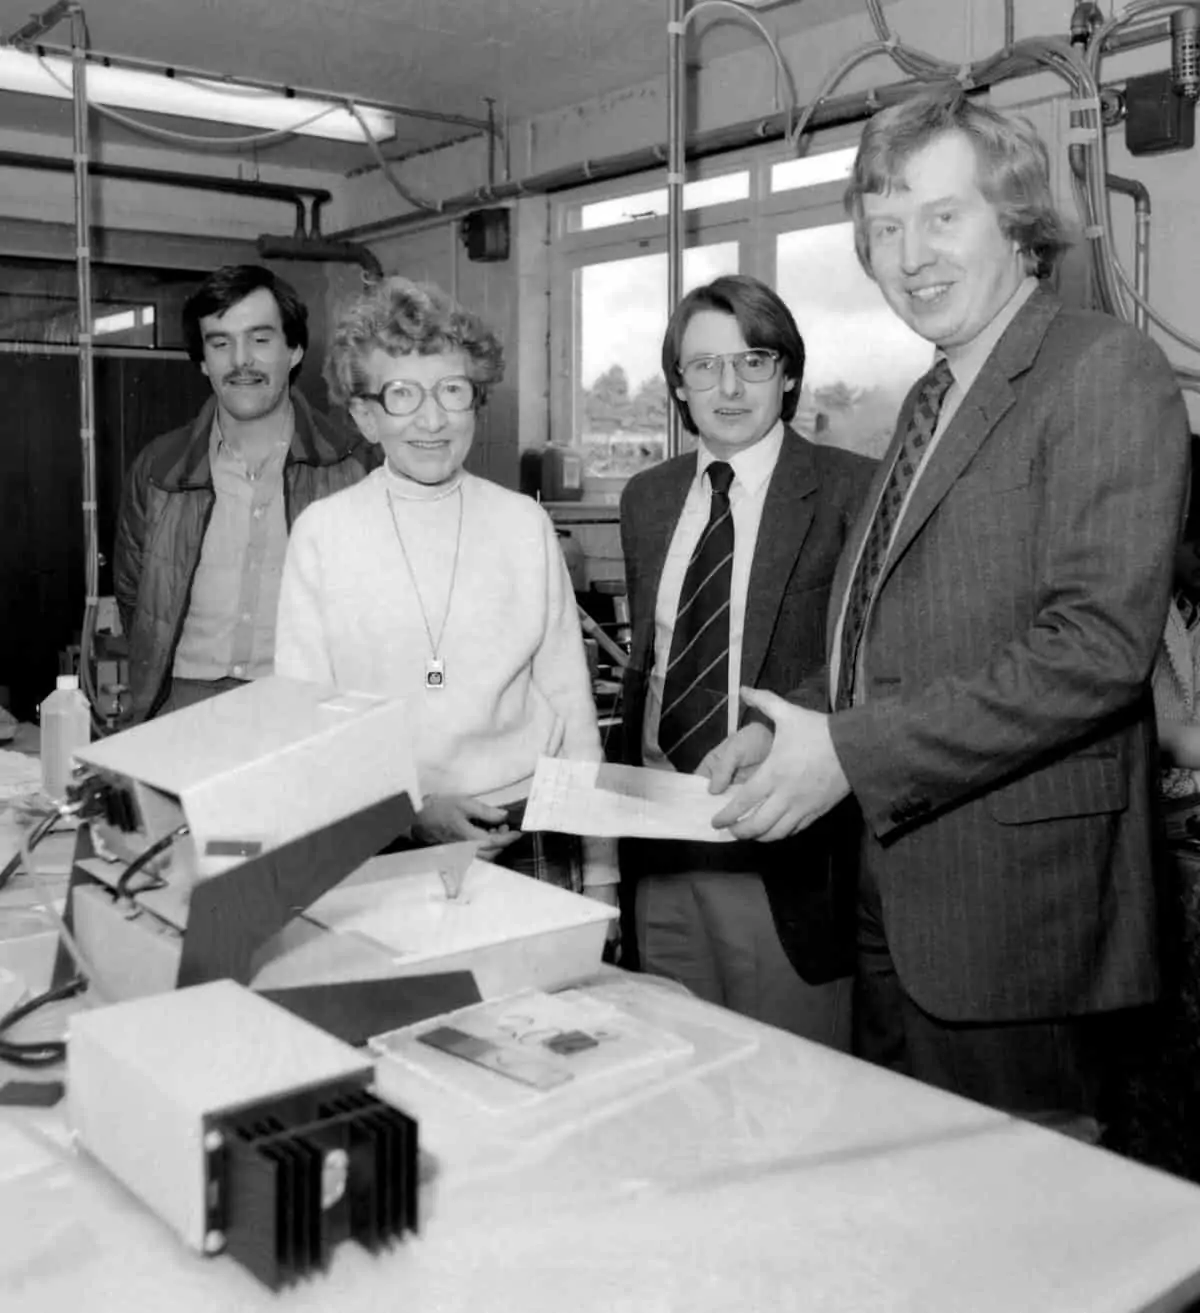 Ralph Young and Eddie Ruffell discuss the new computerised admin system with Doris, who ran the filter department for many years